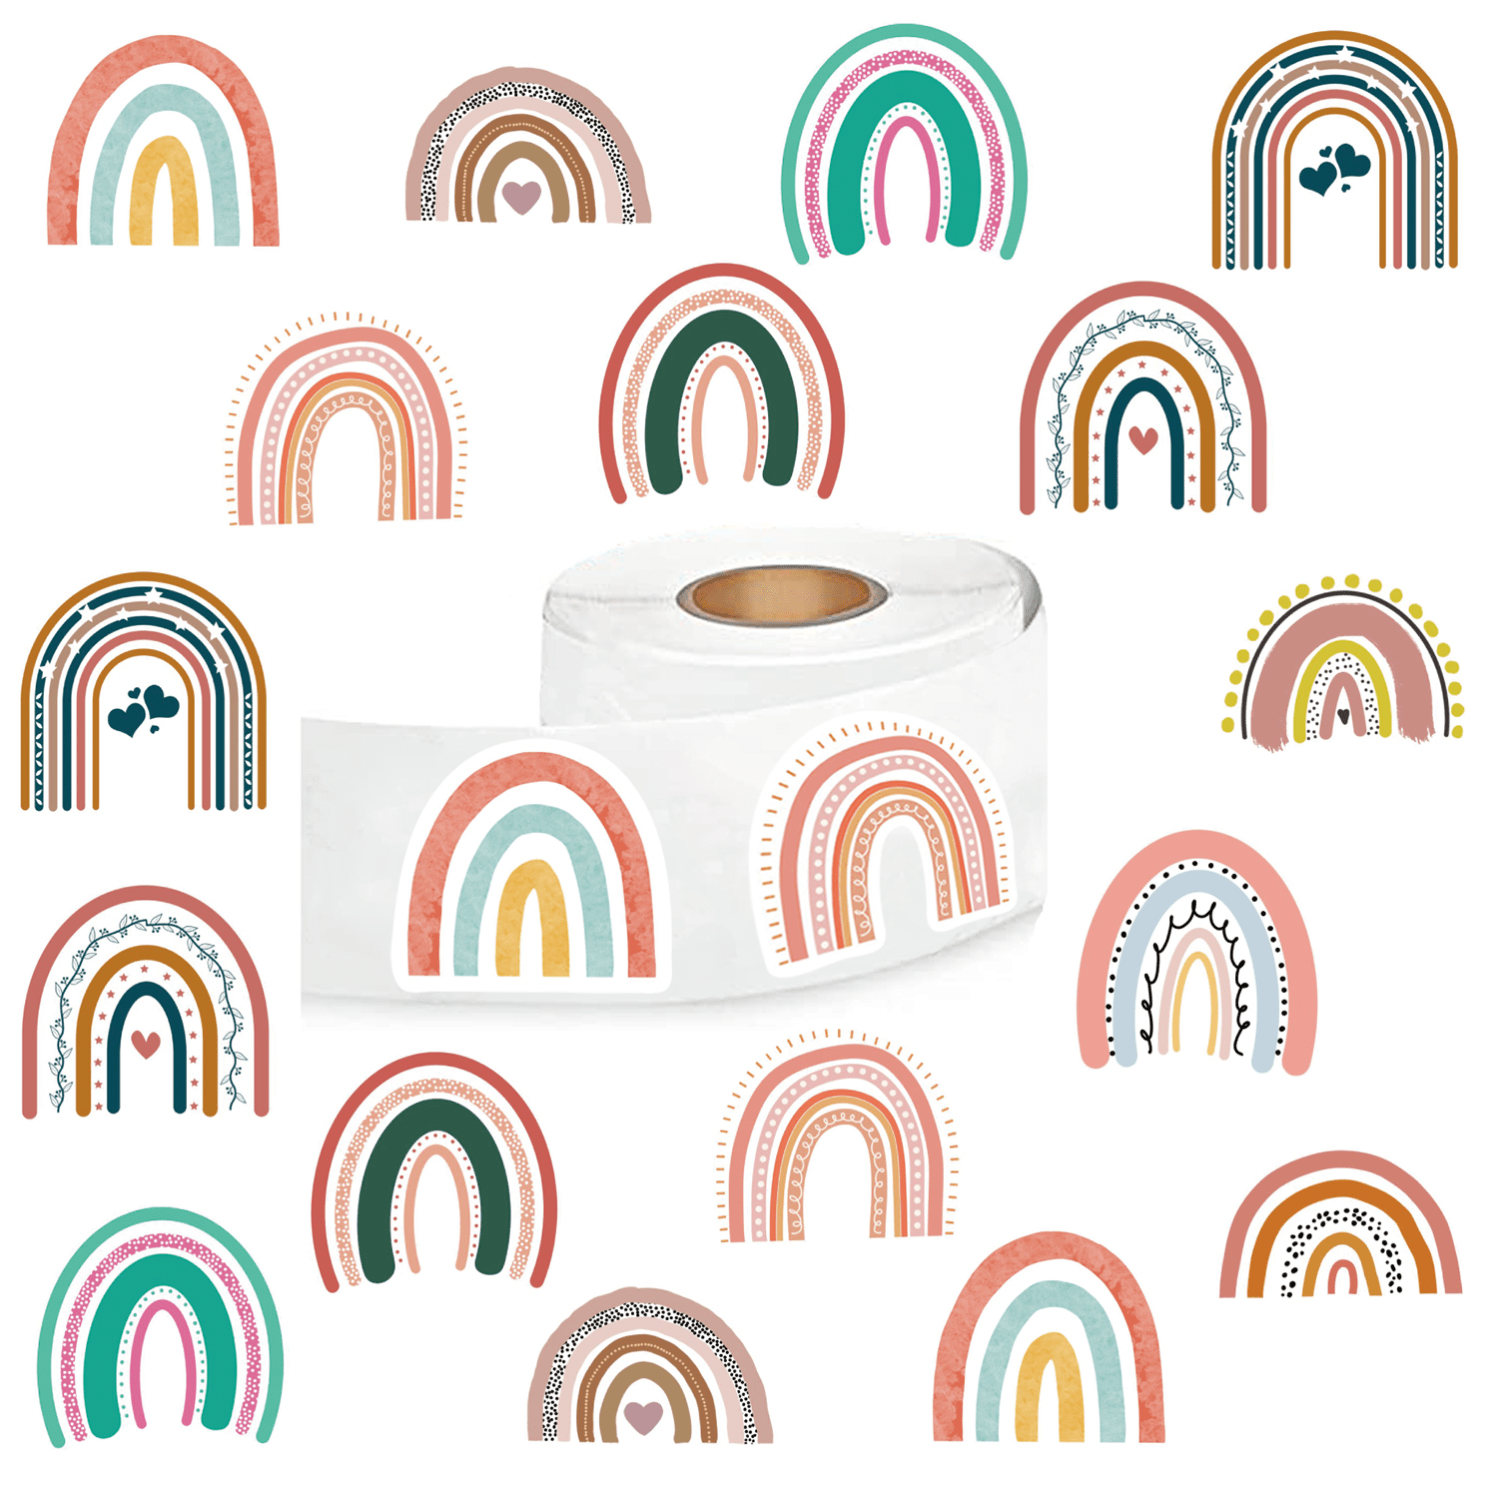 

500pcs Boho Rainbow Stickers, Cute Aesthetic Decals Rolls Self Adhesive Seals For Scrapbooking Cards Envelopes Handmade, Gifts For Teens Adults Party Supply (1 Inch Labels/ 10 Patterns)